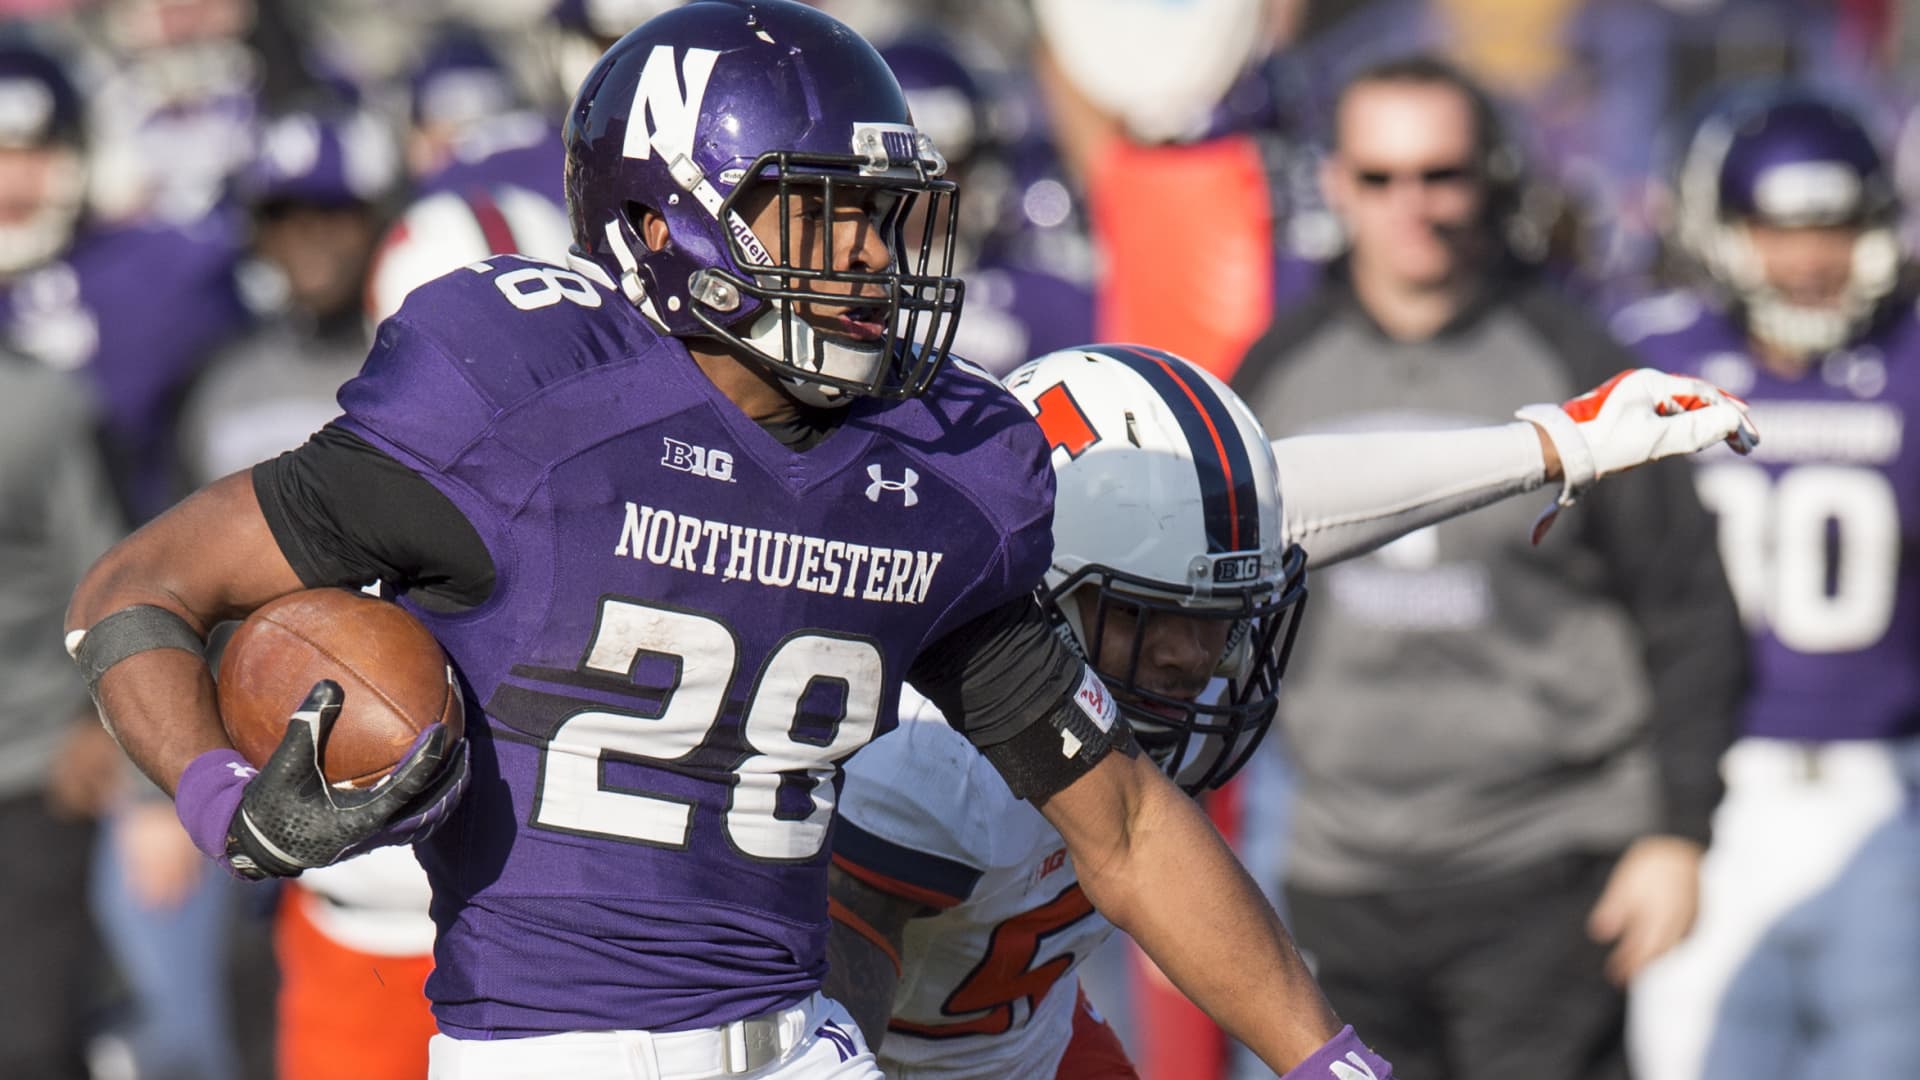 November 29, 2014: Illinois' T.J. Neil Jr. (52) attempts to tackle Northwestern's Justin Jackson (28) during the game between Northwestern University and the University of Illinois at Ryan Field in Evanston, Illinois.